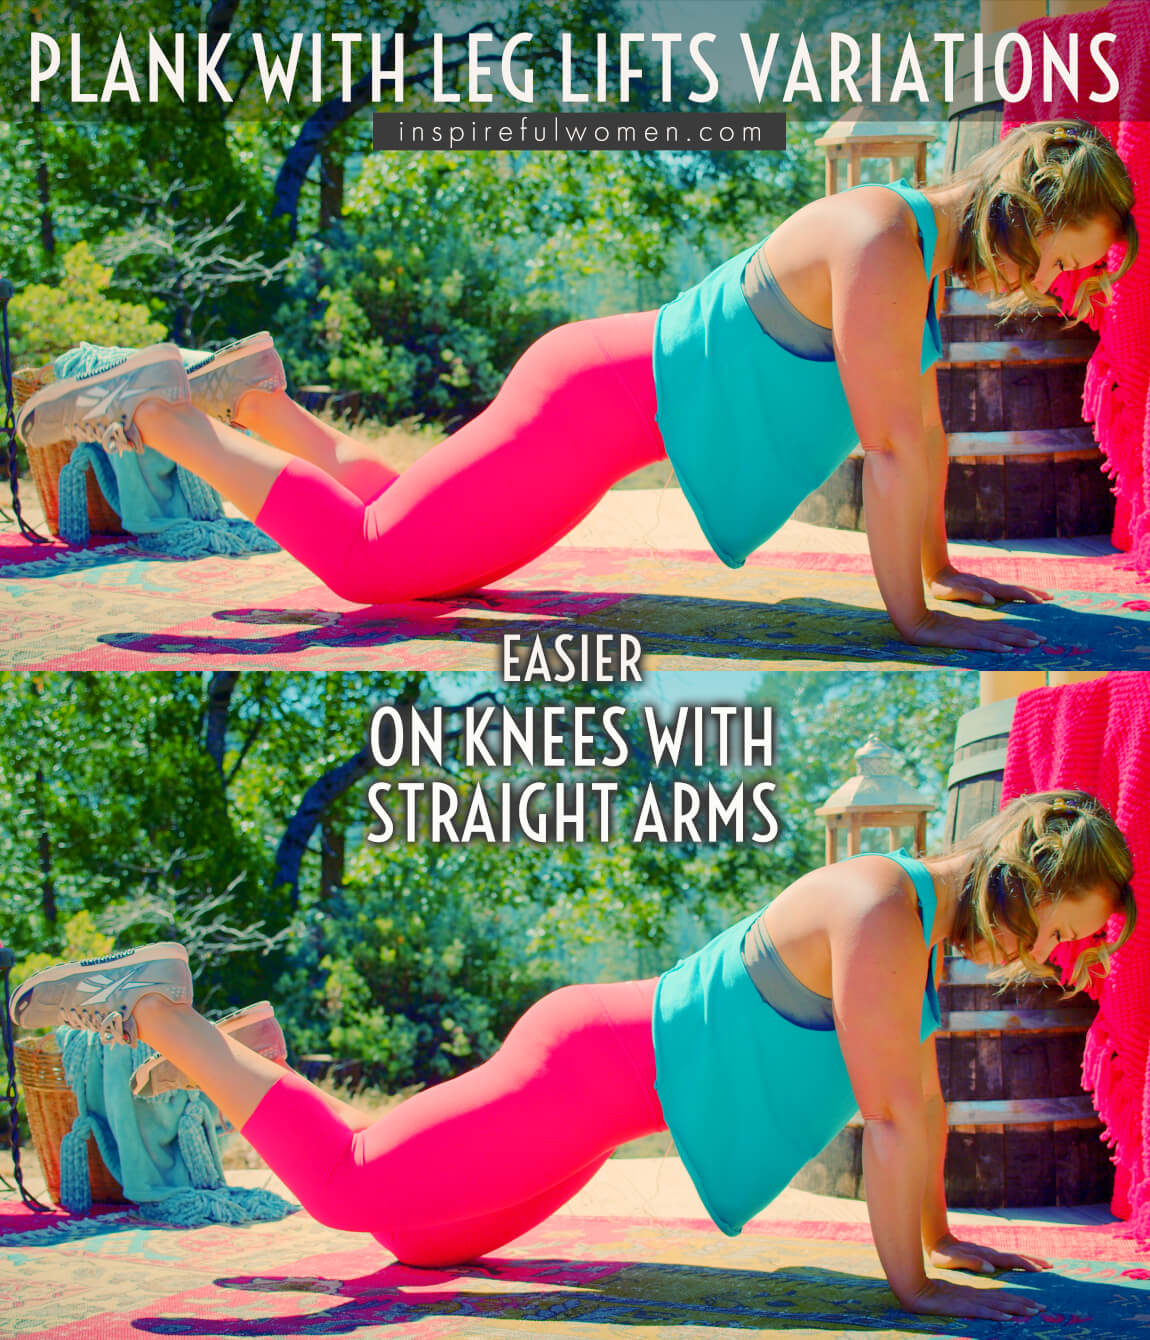 on-knees-with-straight-arms-side-plank-leg-lifts-easier